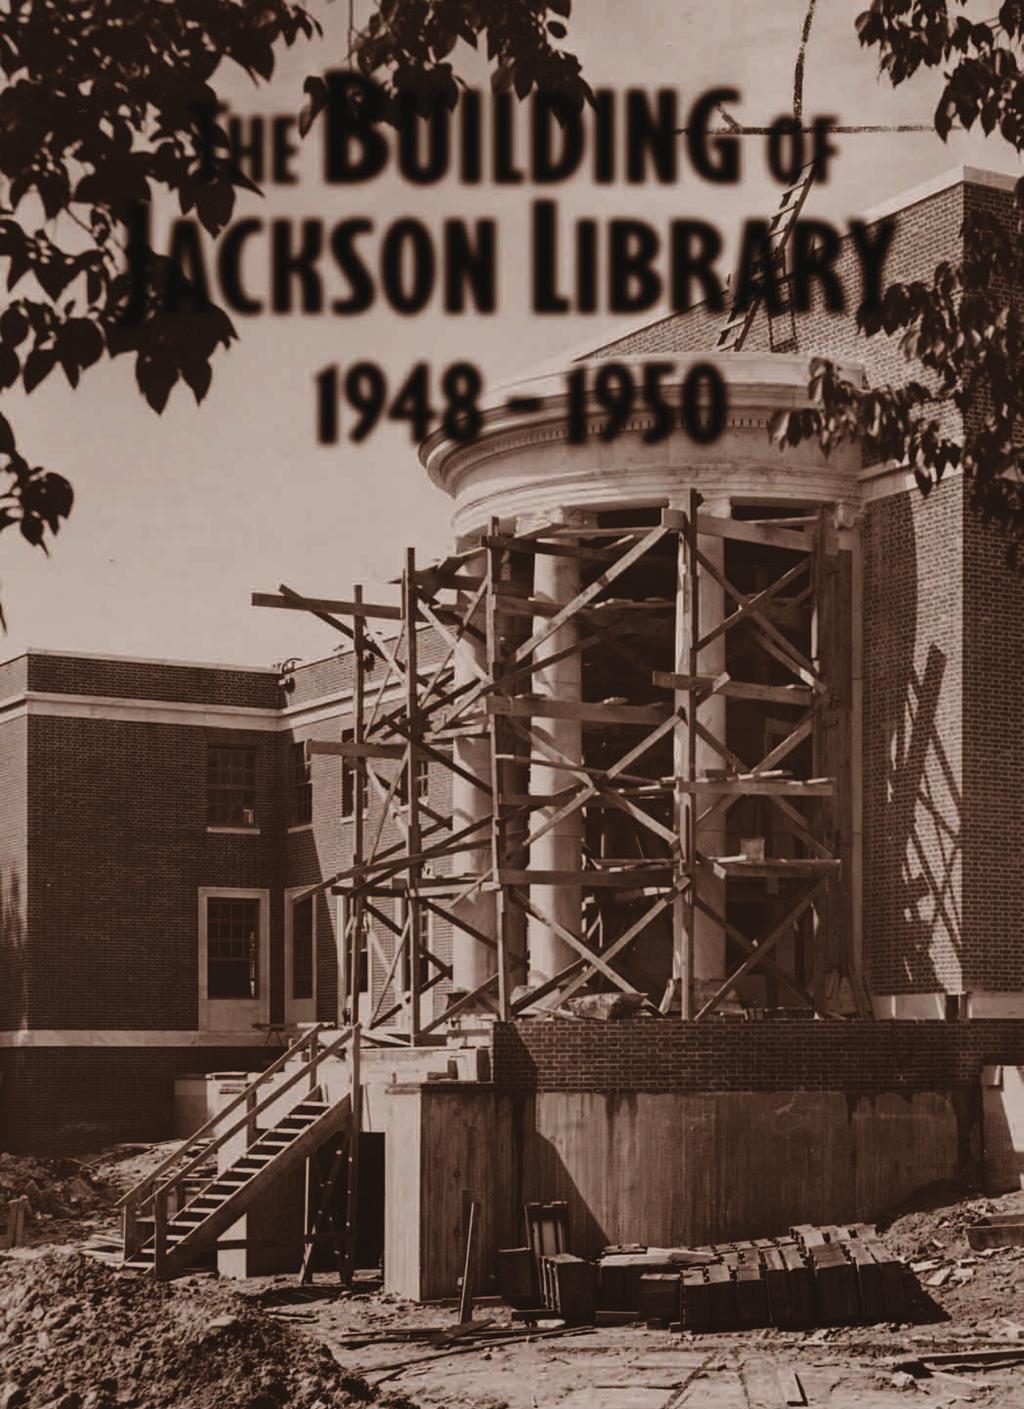 The Building of Jackson Library